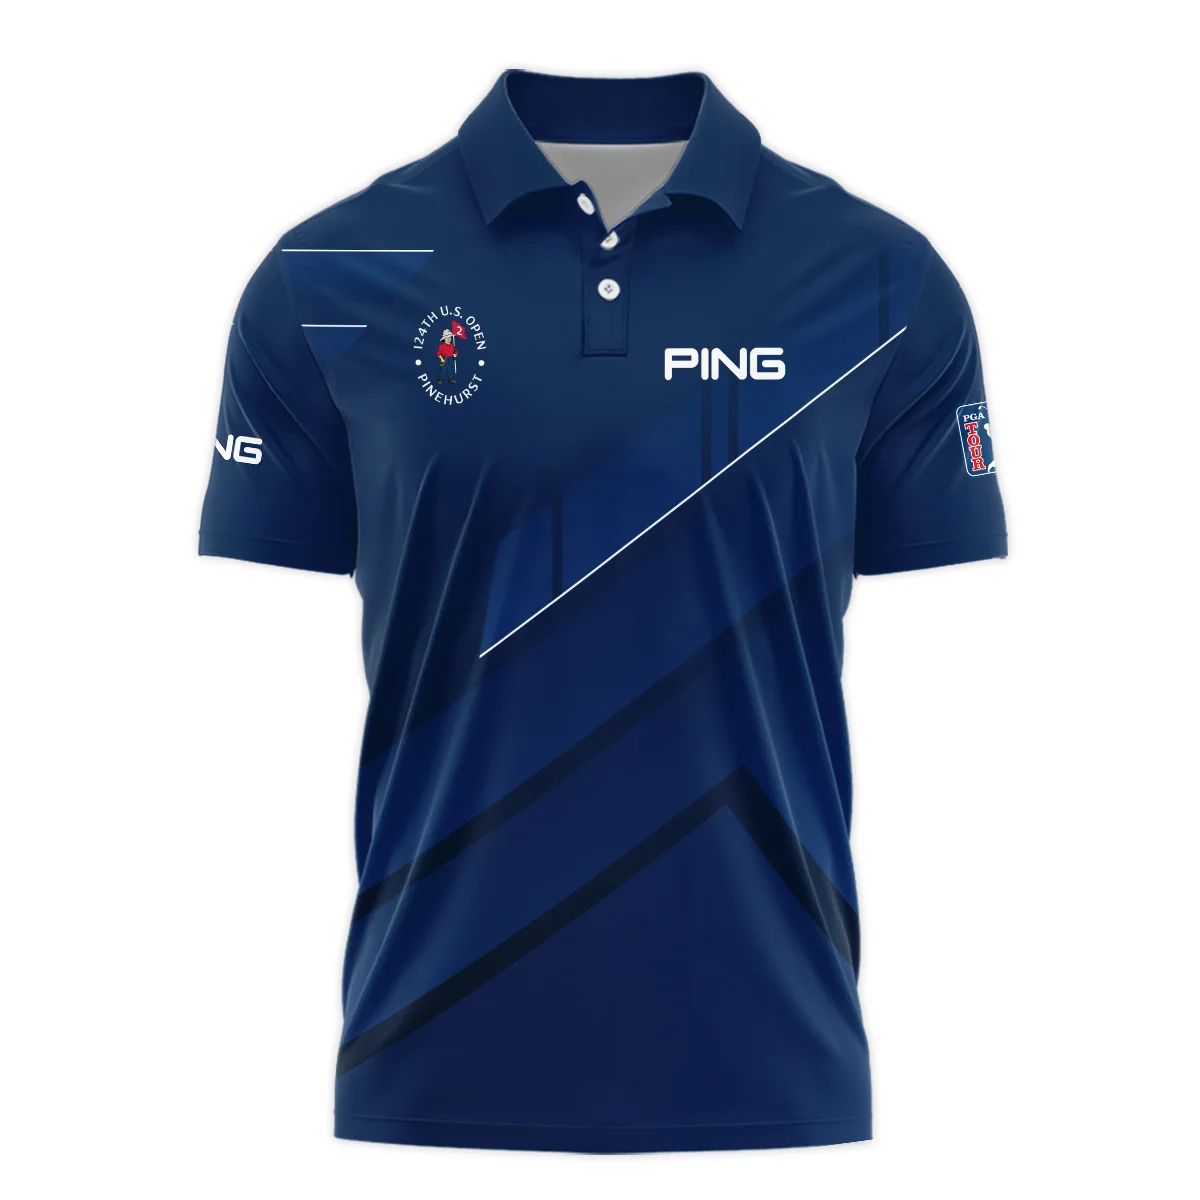 Ping 124th U.S. Open Pinehurst Blue Gradient With White Straight Line Long Polo Shirt Style Classic Long Polo Shirt For Men